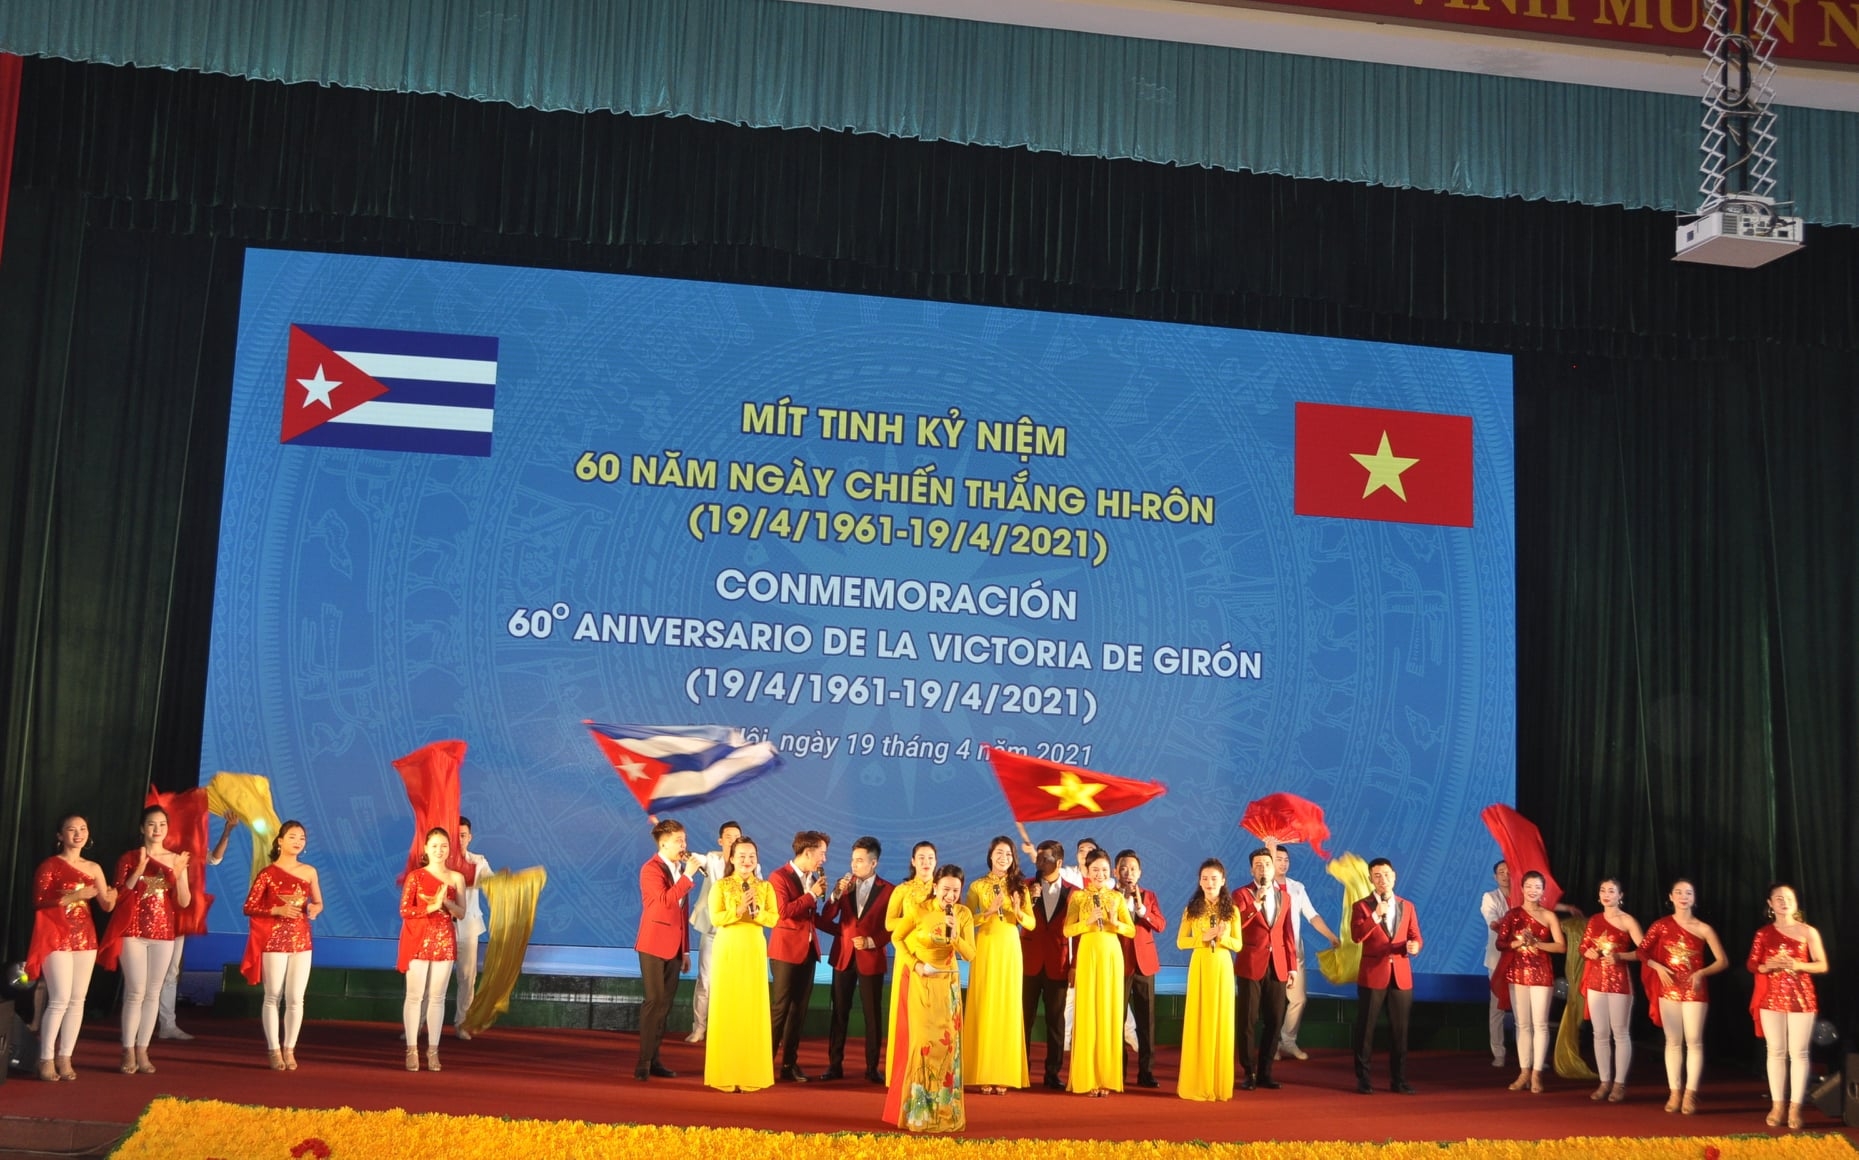 Cuban Revolution’s 60th anniversary of Giron Victory marked in Hanoi